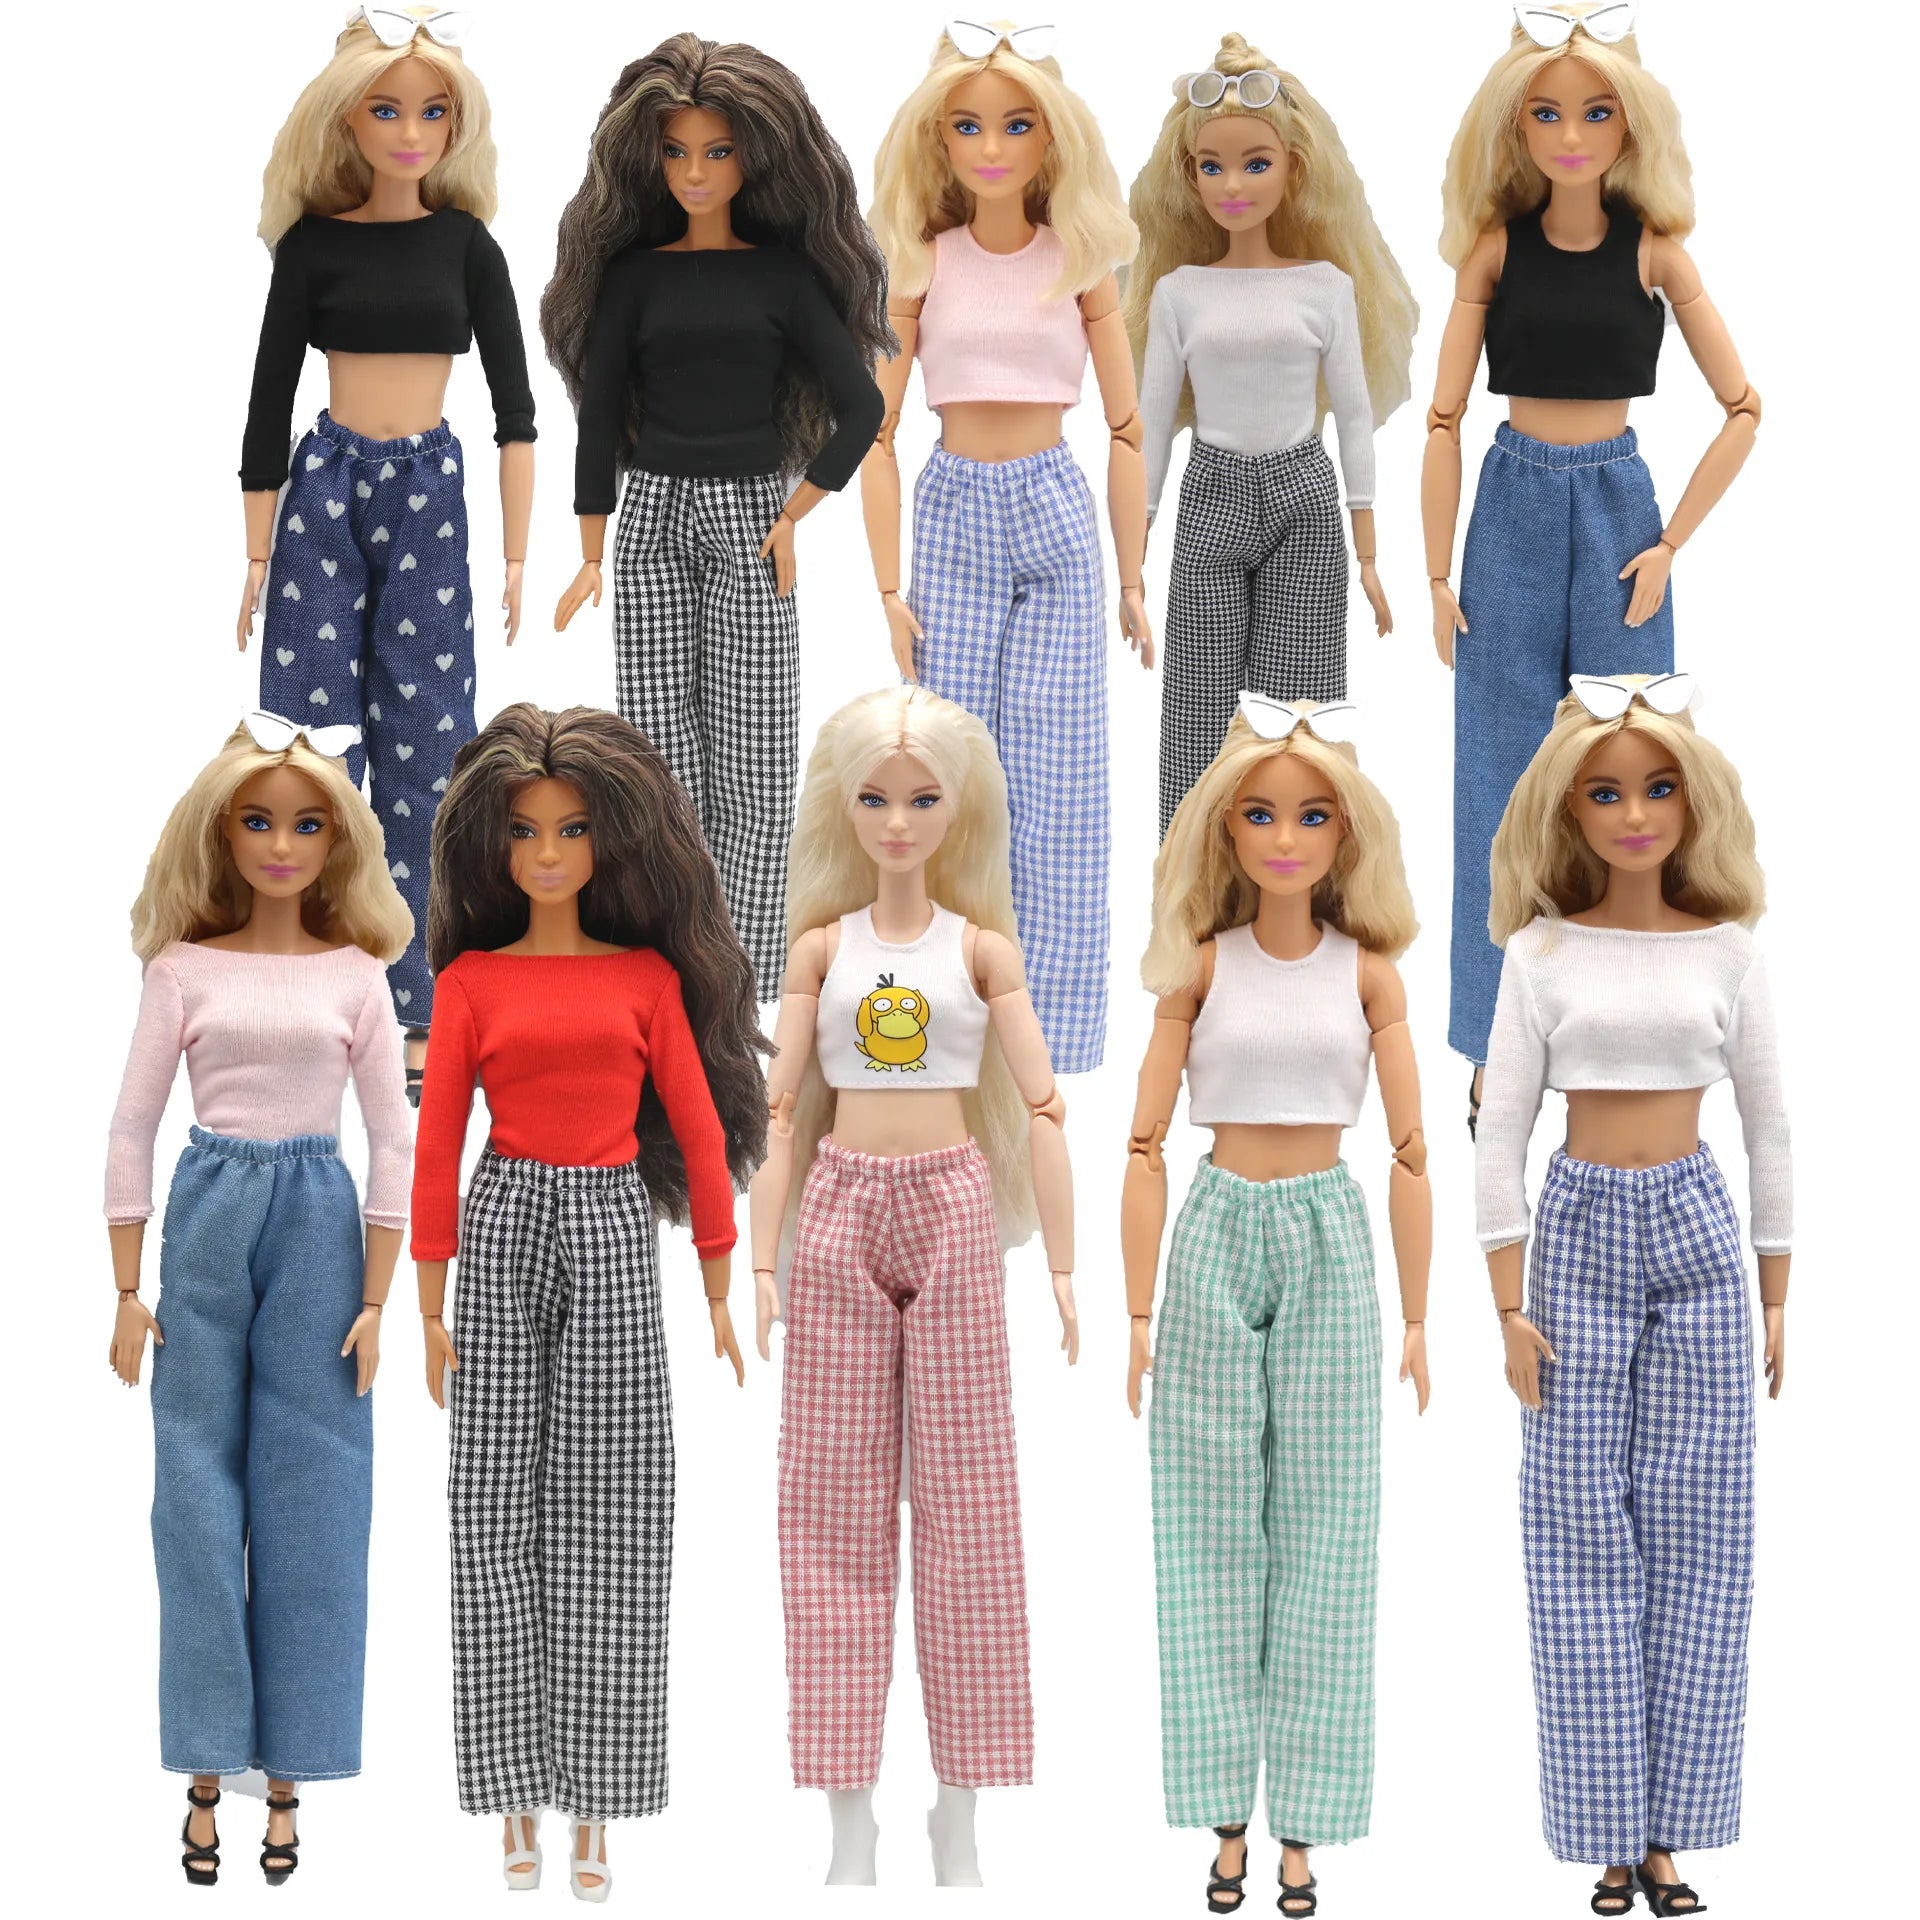 New 1/6 Doll Clothes Fashion Sleeveless Top and Casual Pants Denim Grid Daily Wear Accessories Clothes for Barbie Doll